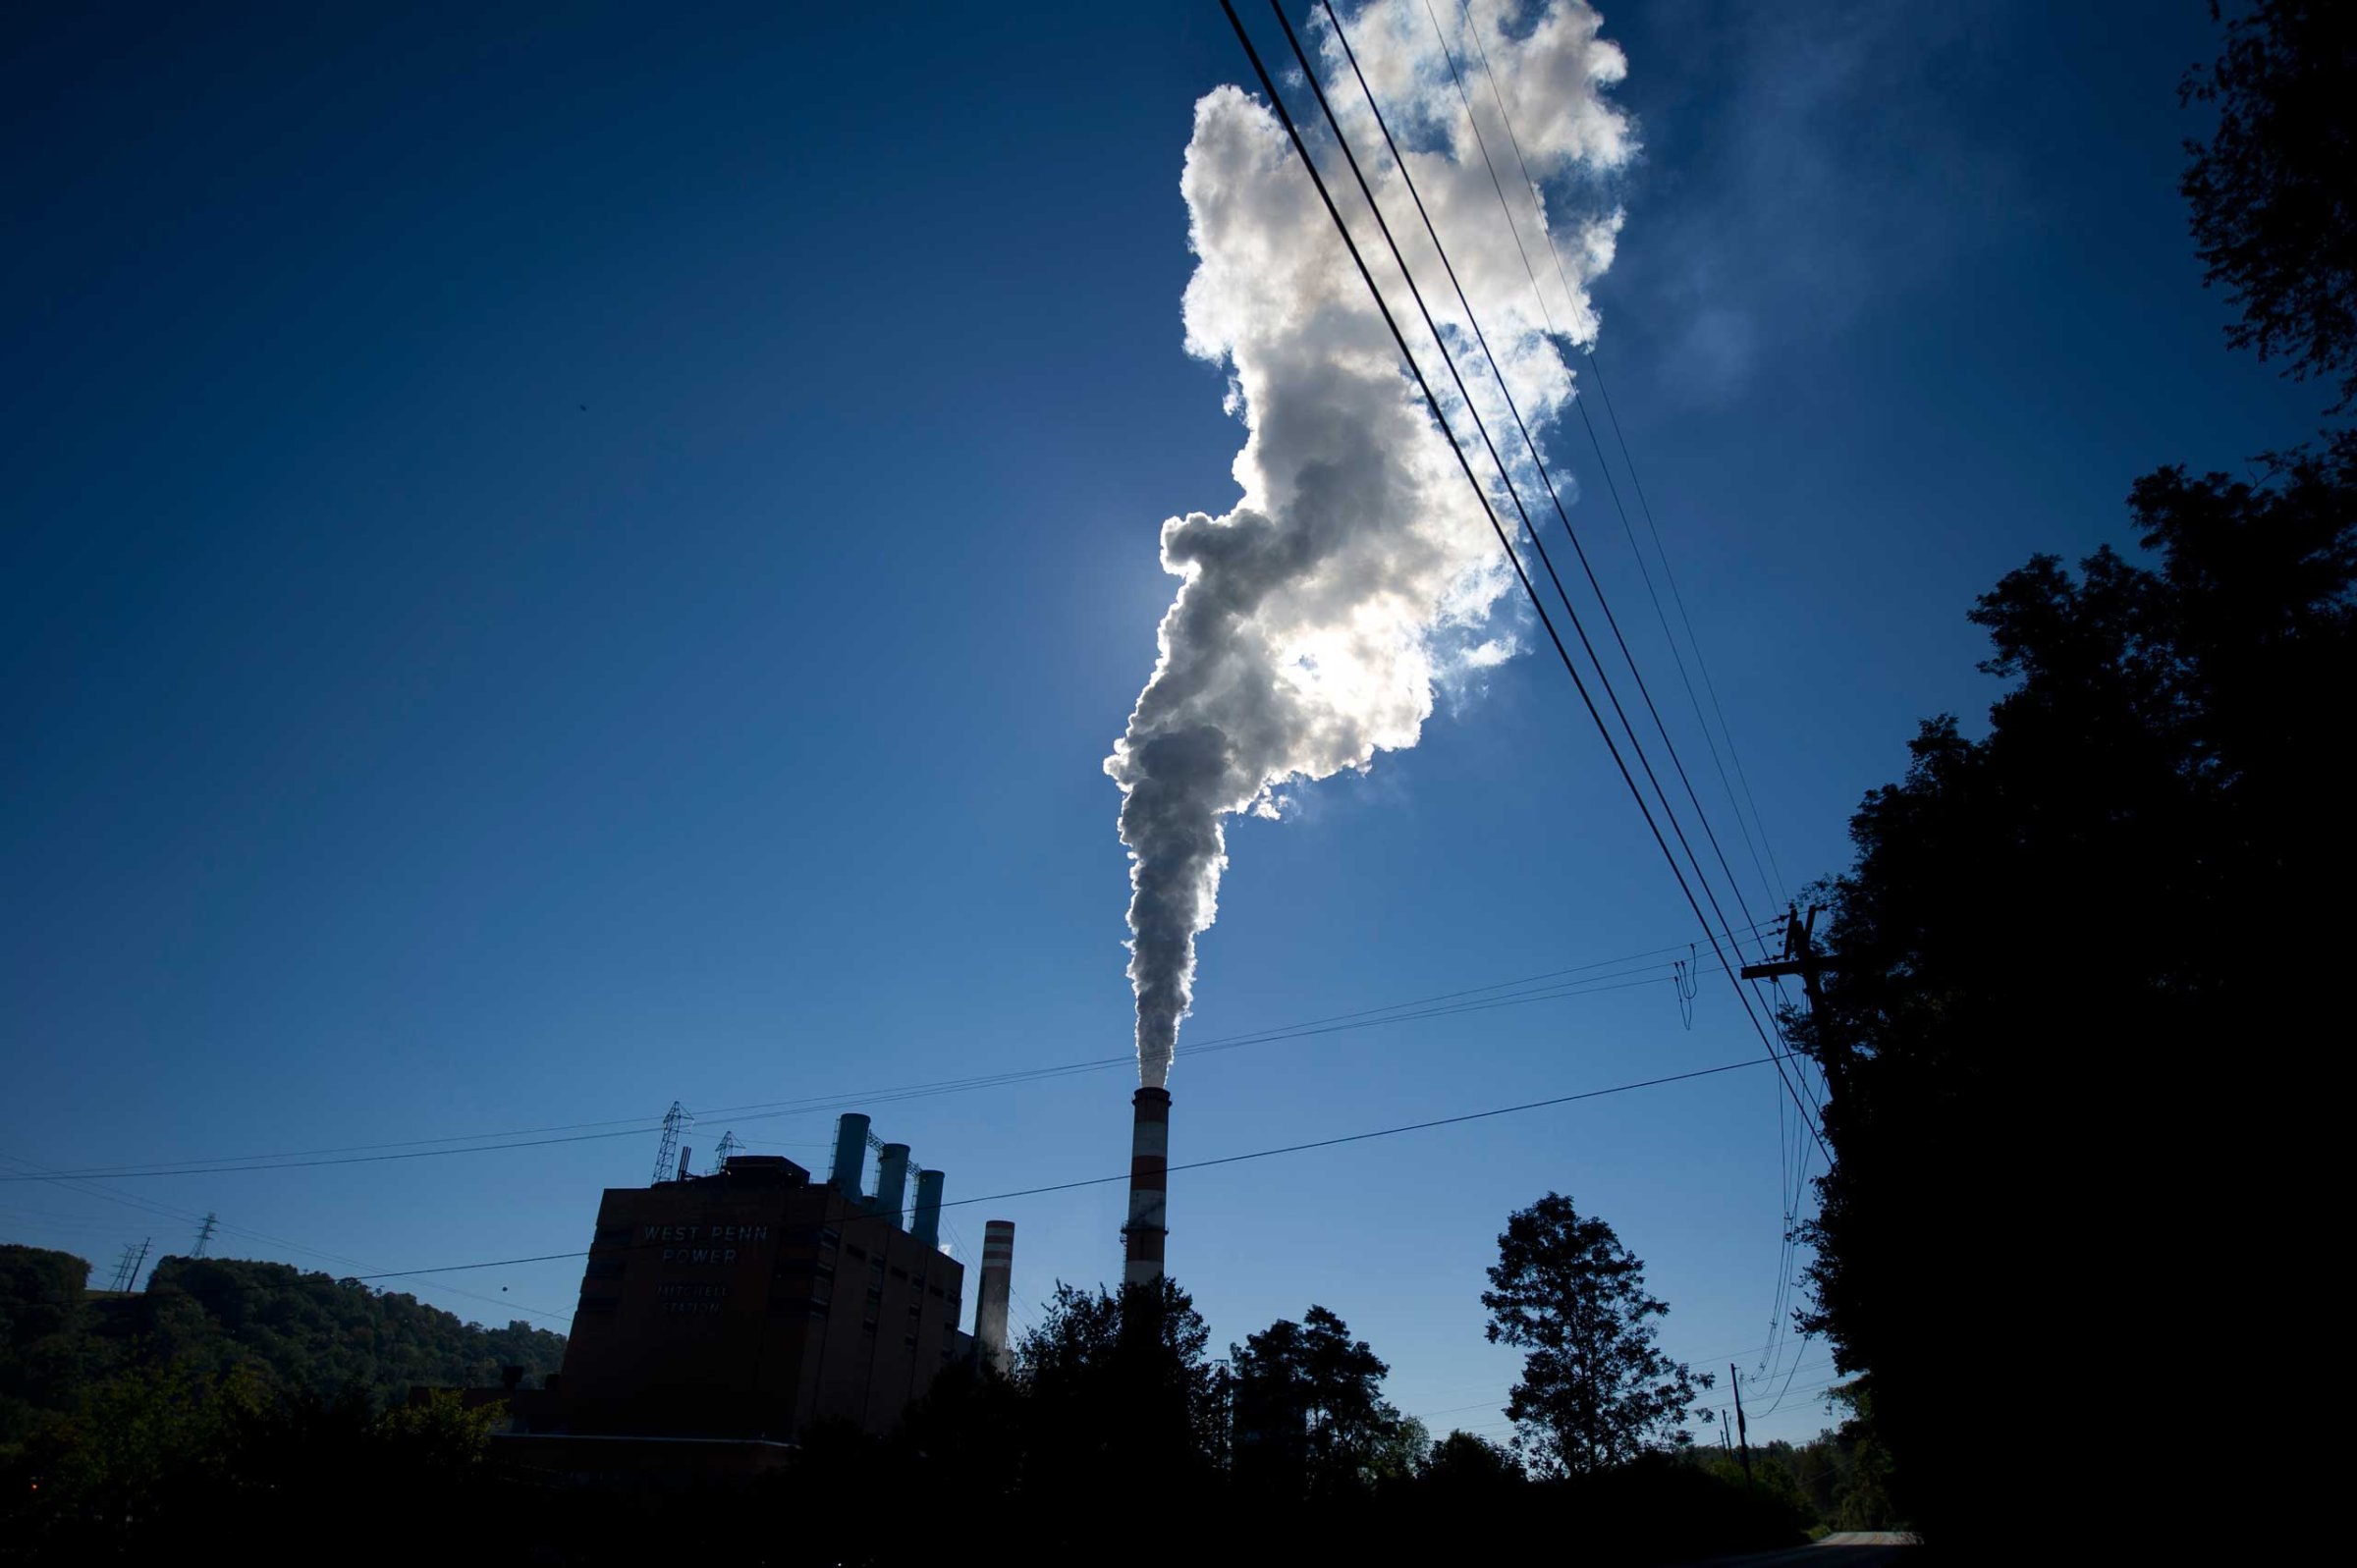 A plume of exhaust extends from the Mitchell Power Station, a coal-fired power plant located 20 miles southwest of Pittsburgh, on Sept. 24, 2013 in New Eagle, Pa.